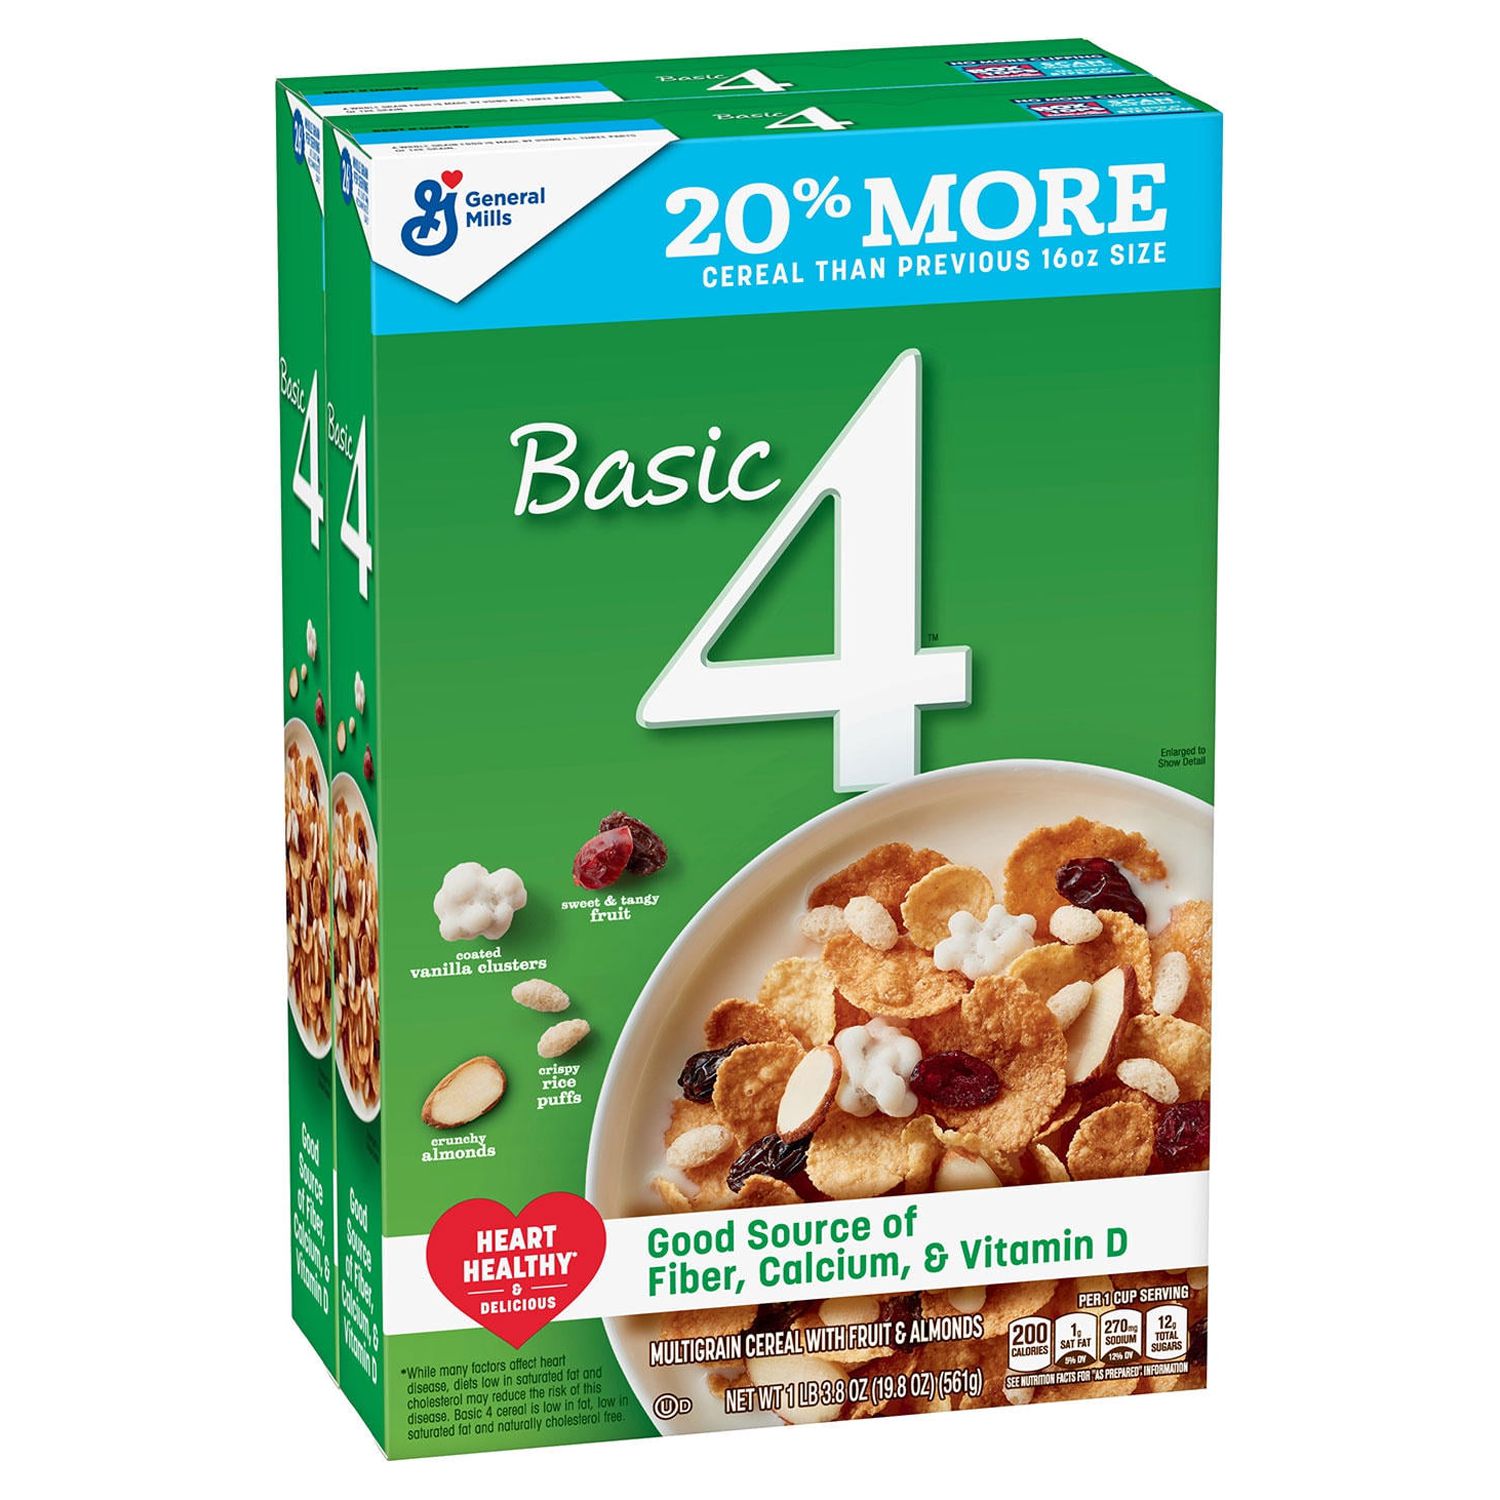 Basic 4, Multigrain Fruit and Nuts Cereal, 19.8 oz pack of 2 - image 4 of 9